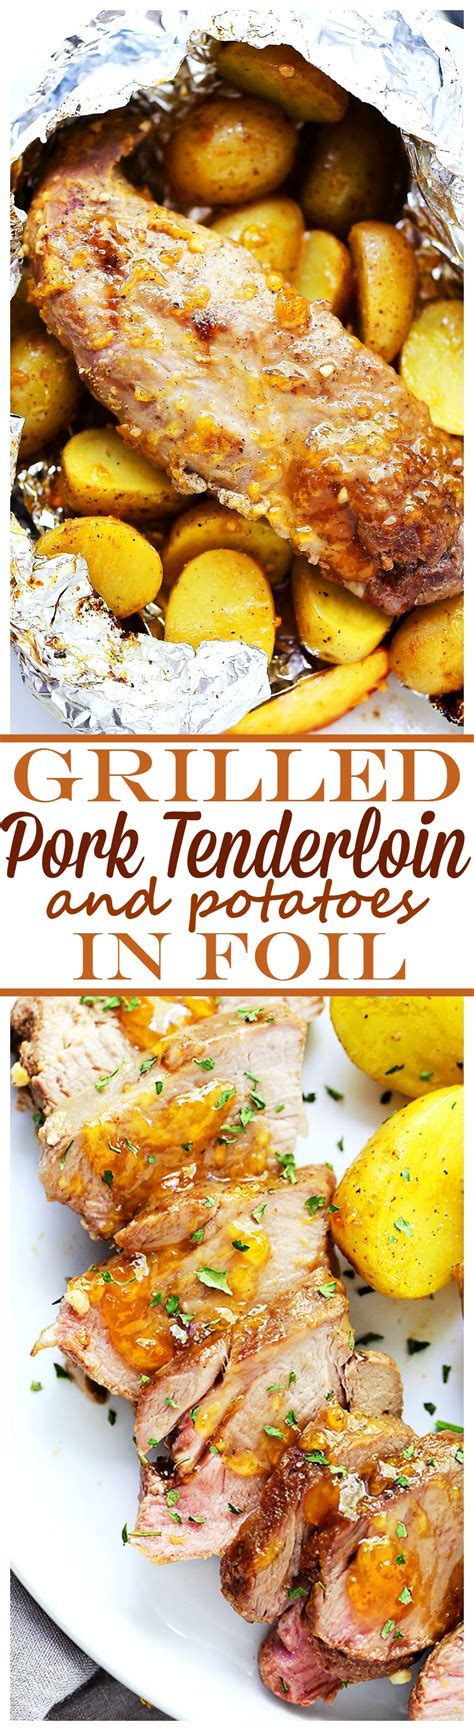 Pork loin may not be as apt to dry out, but if you prefer simple flavors, season as recommended by this livestrong.com recipe for roast pork tenderloin. Grilled Peach-Glazed Pork Tenderloin Foil Packet with Potatoes - Glazed with peach preserves and ...